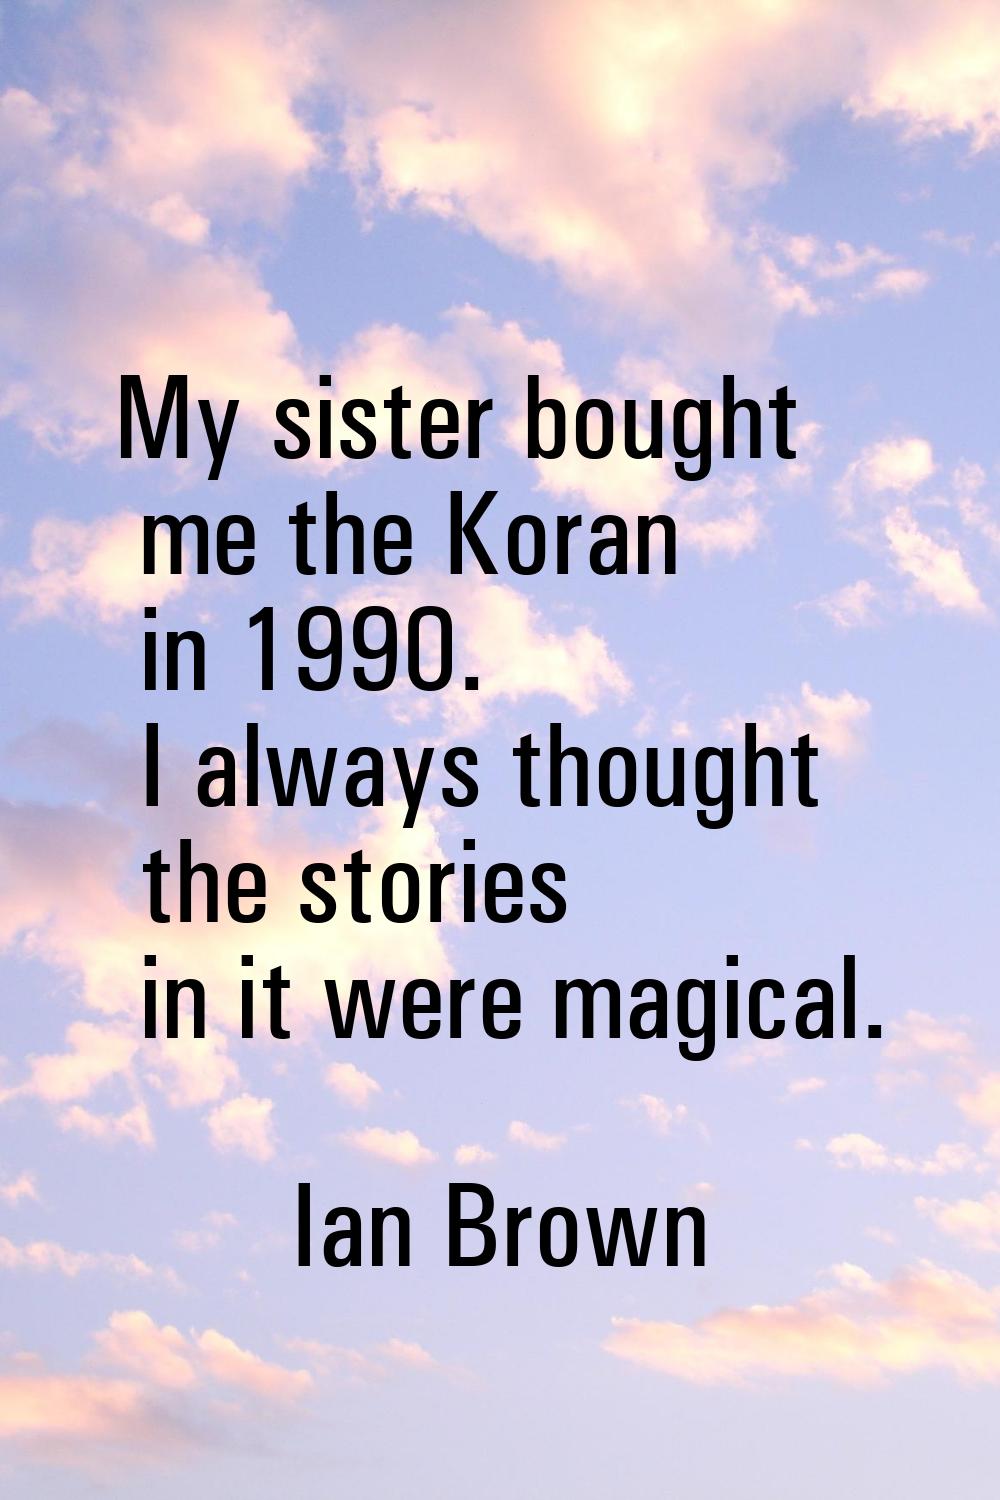 My sister bought me the Koran in 1990. I always thought the stories in it were magical.